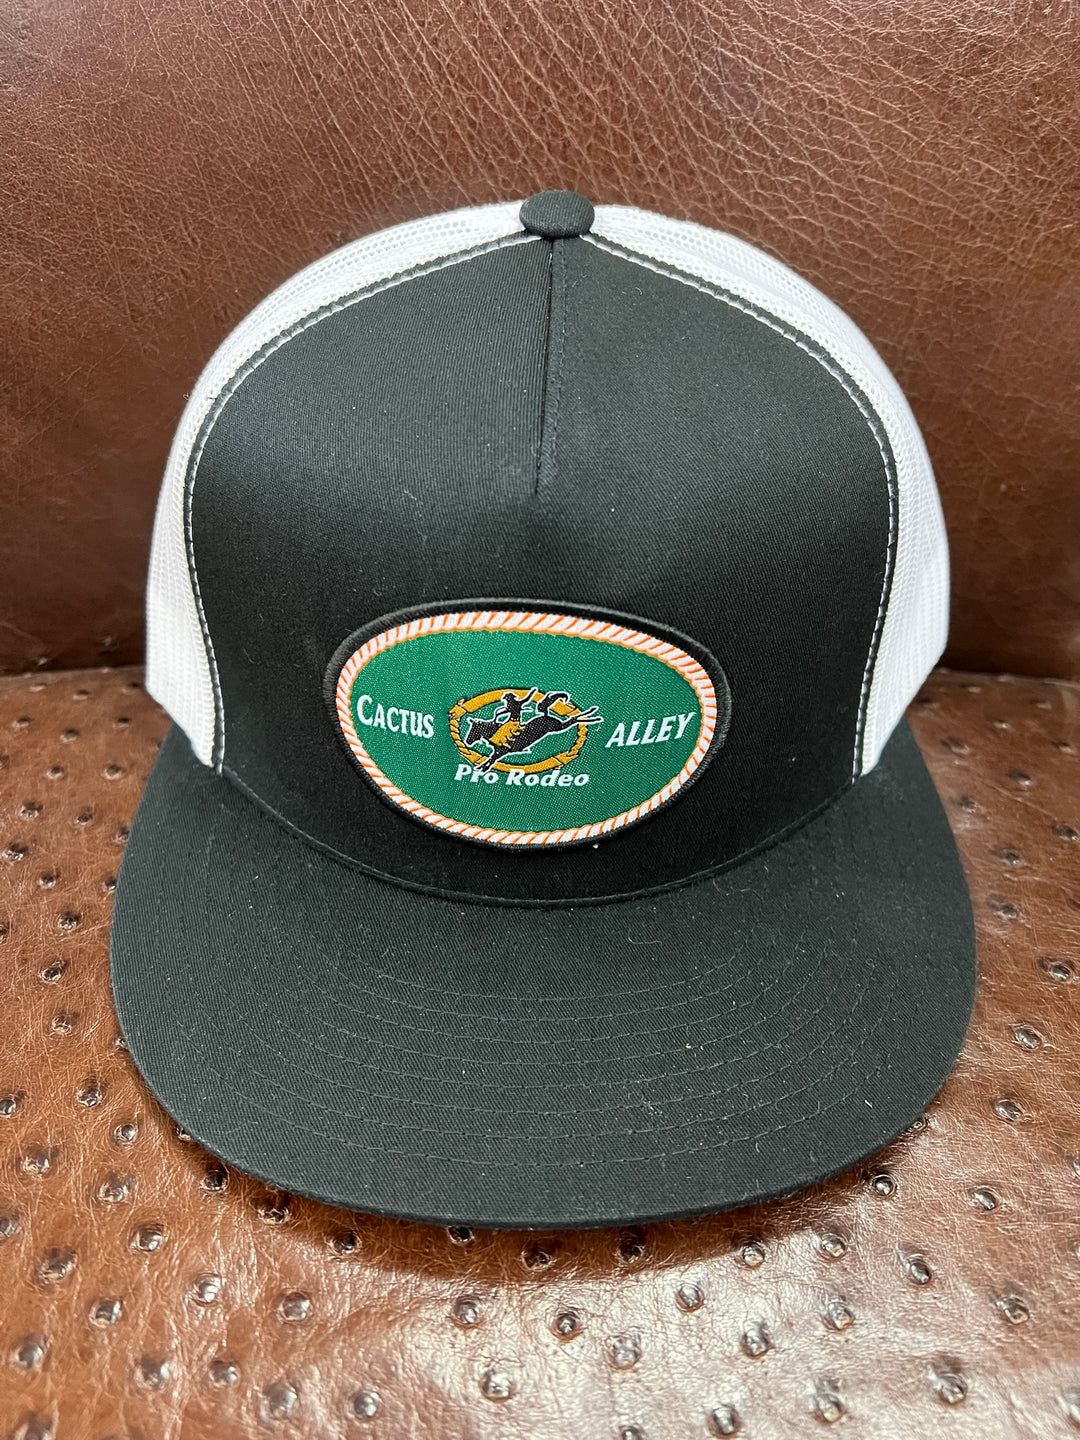 Cactus Alley 5 Panel Pro Rodeo Black Front White Snapback Ball Cap